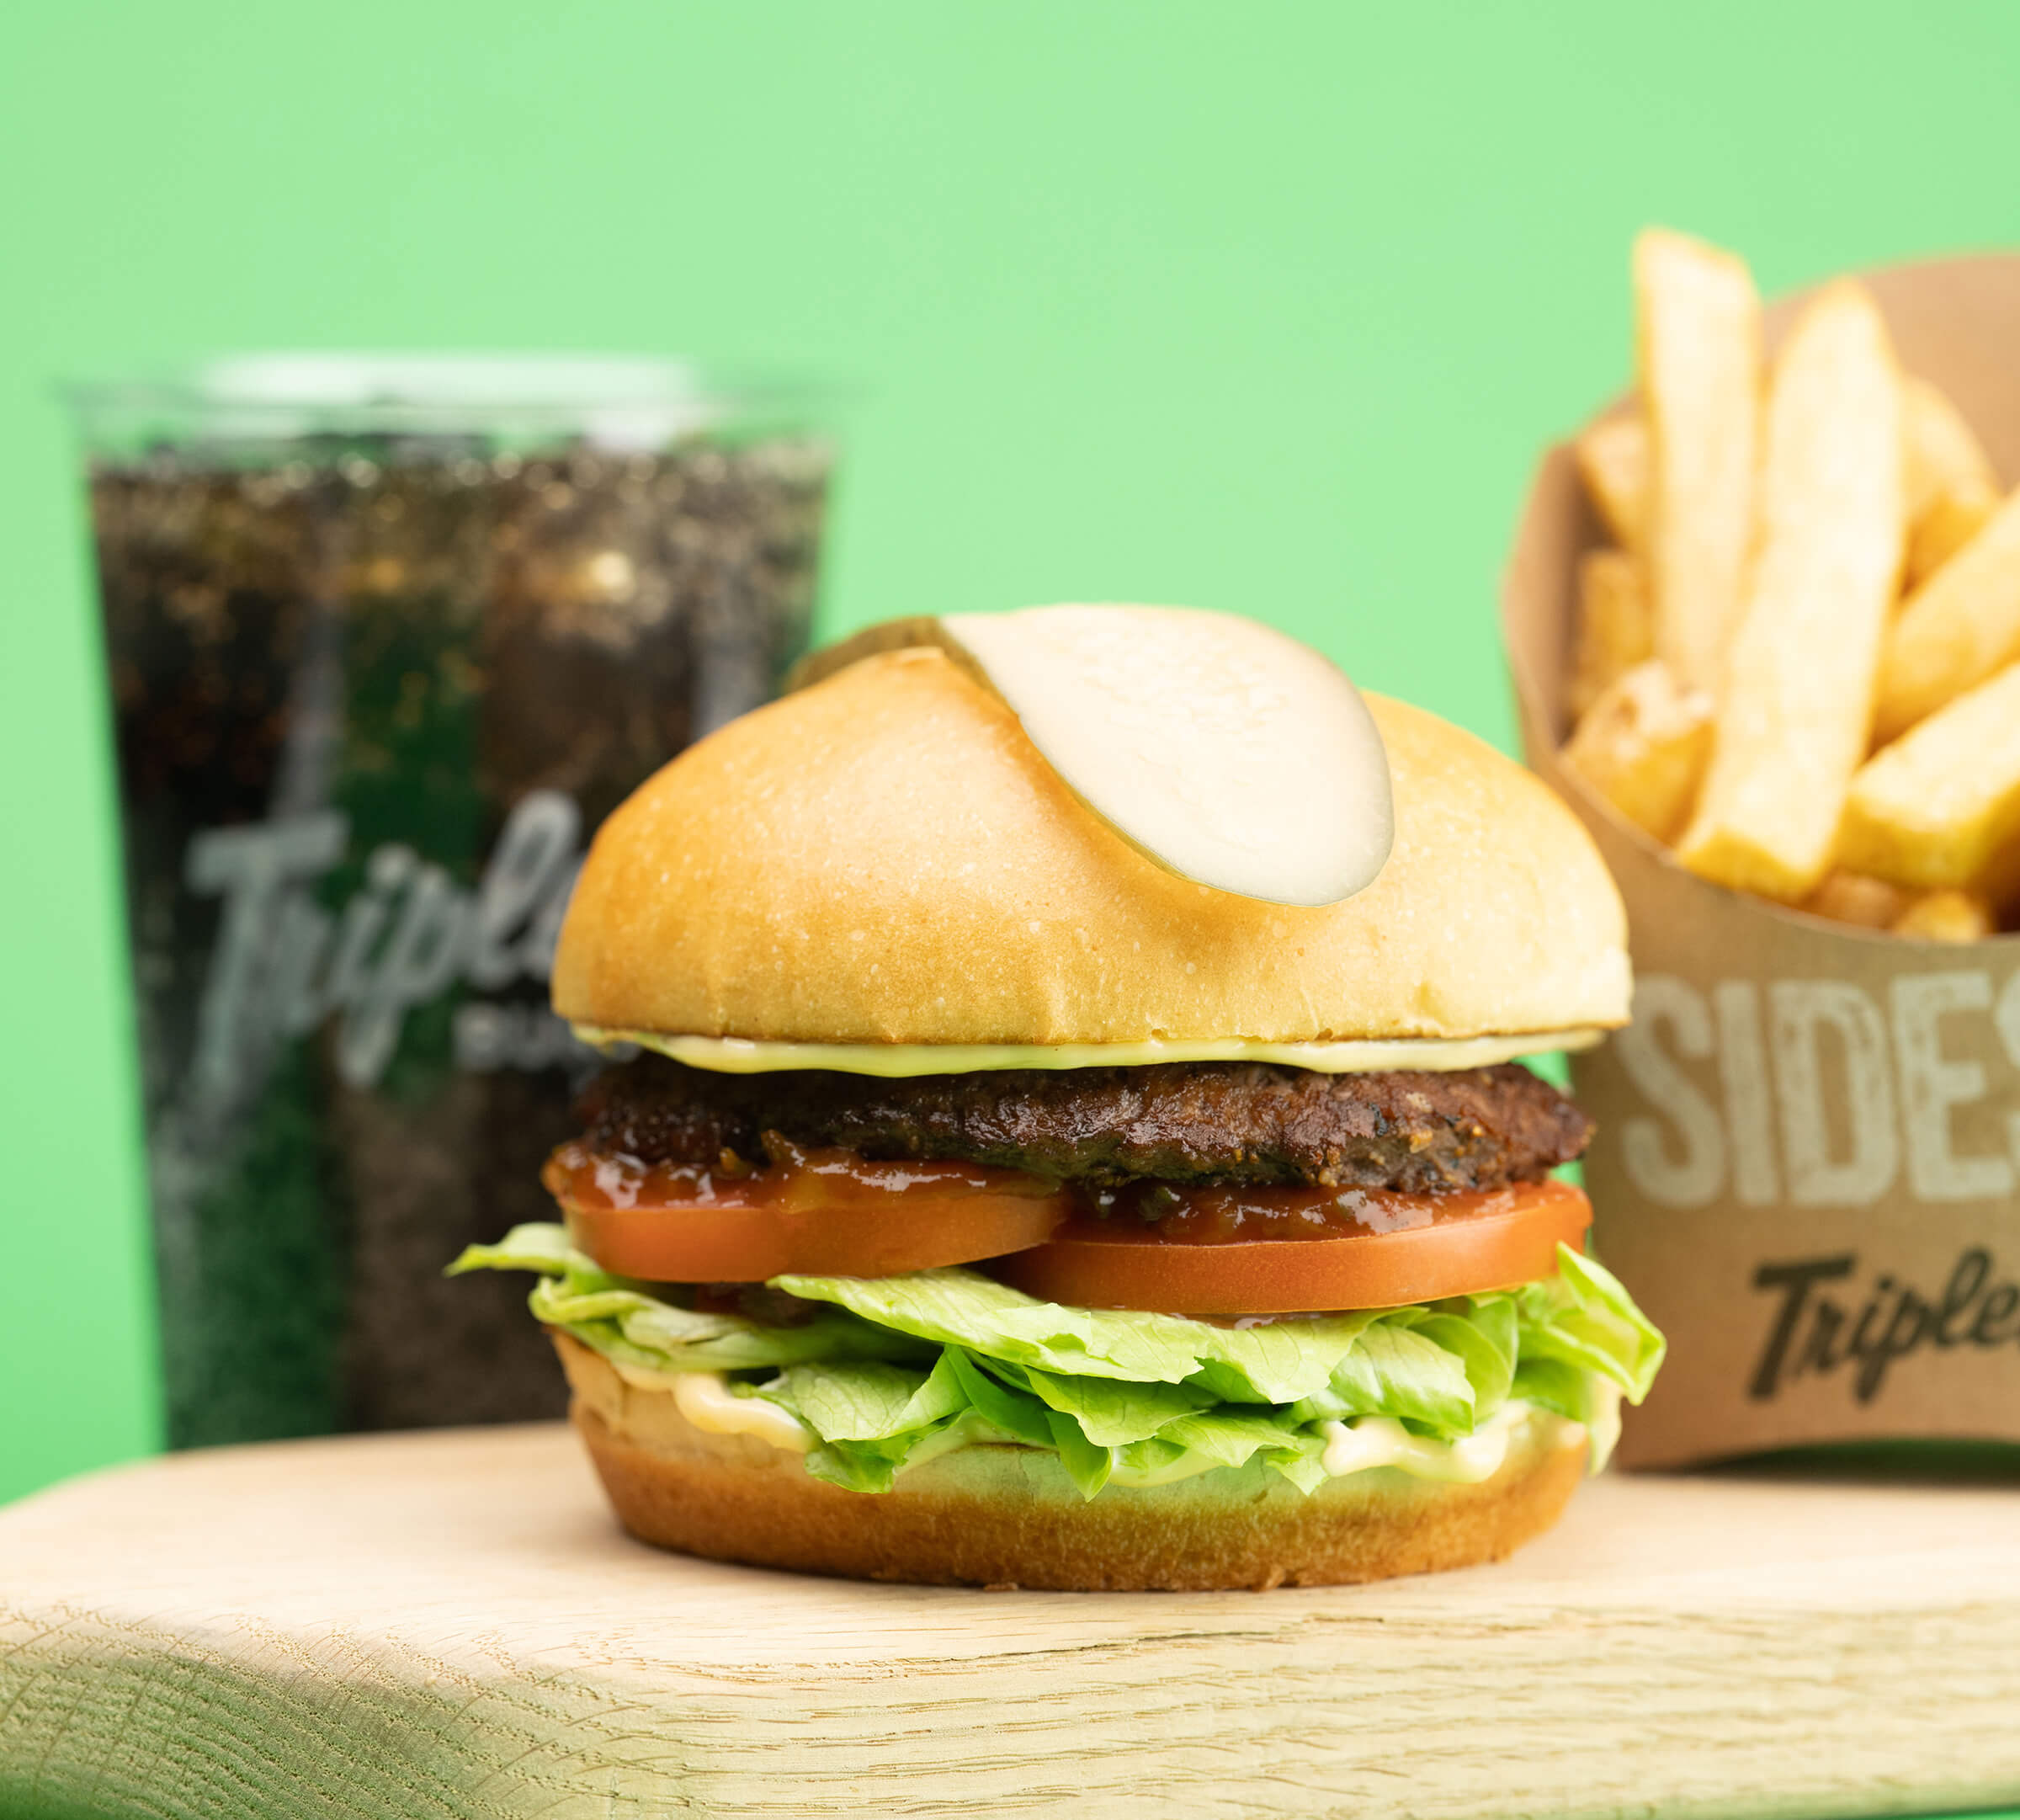 A fully dressed Triple O's burger with an iconic pickle on the bun, fries and a soft drink on a light green background.